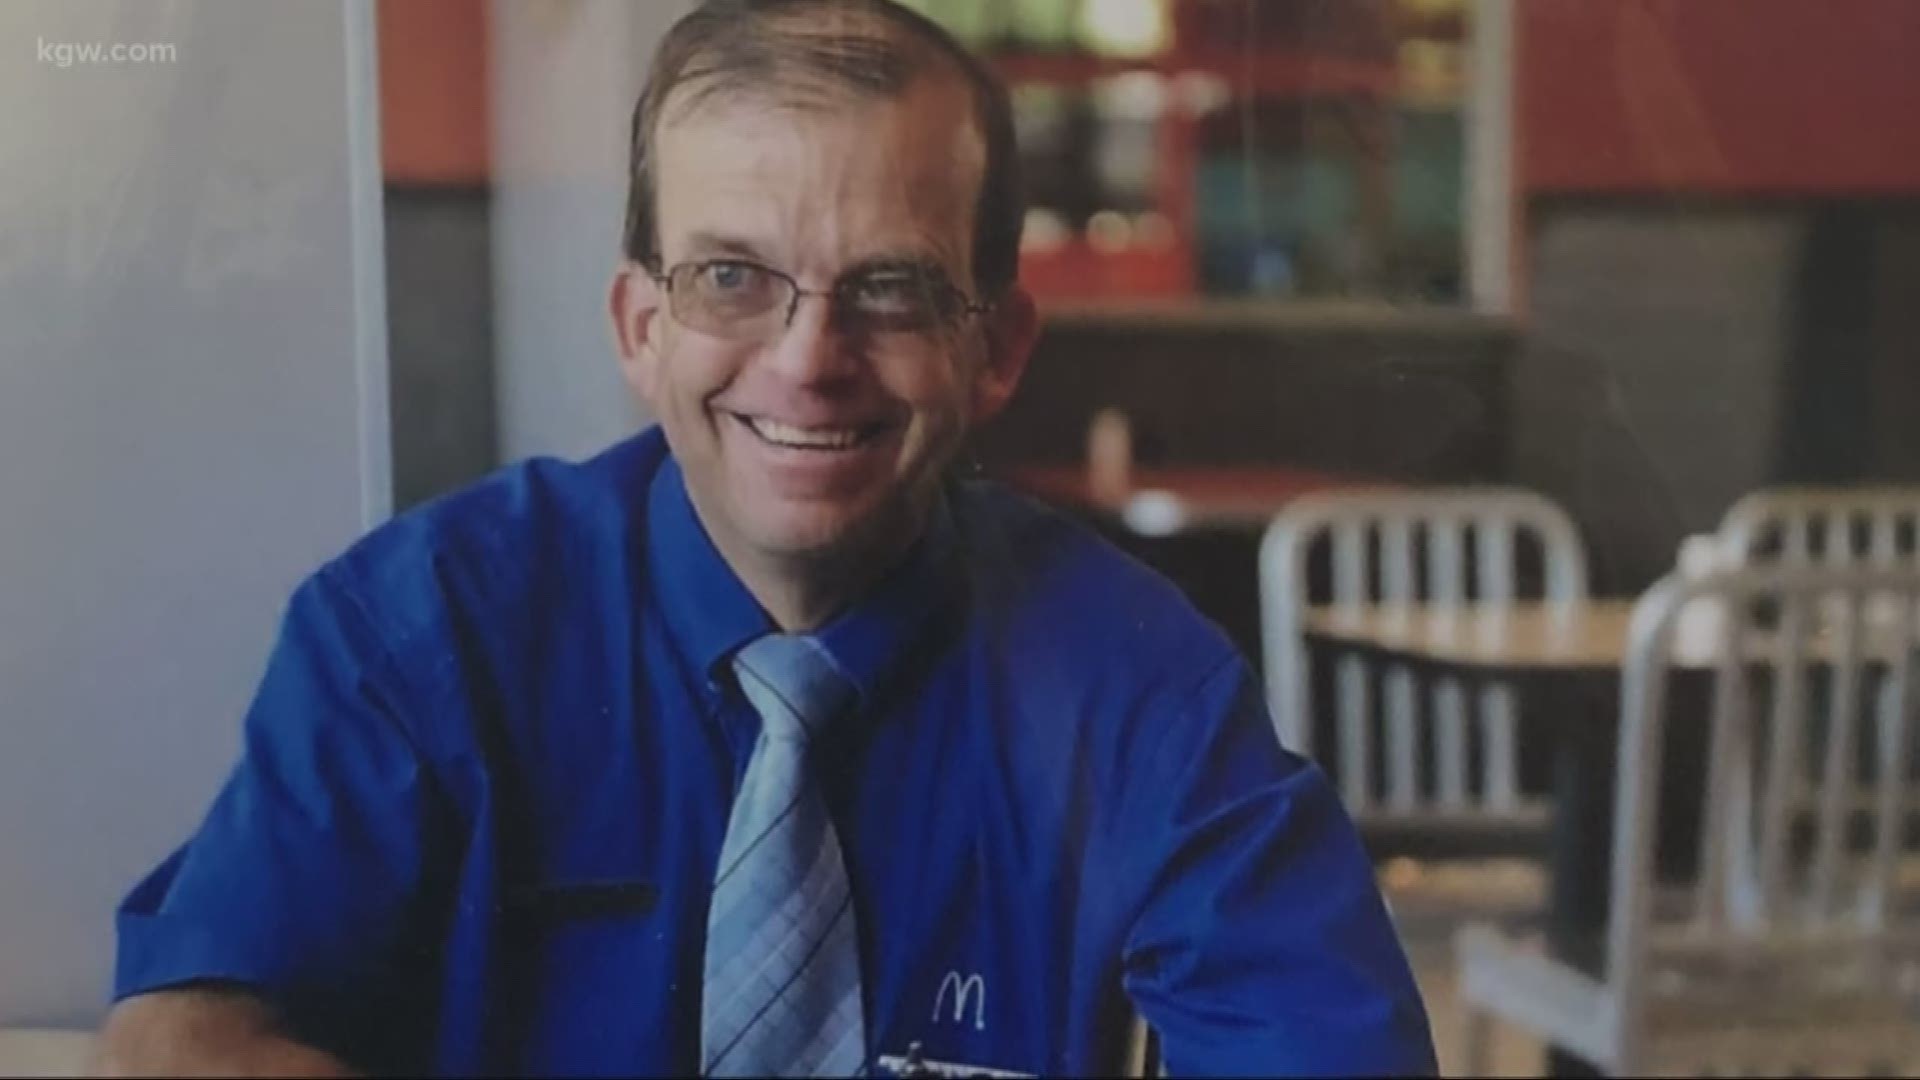 Stories of thanks. Meet a man thankful for 35 years of employment at McDonald’s.